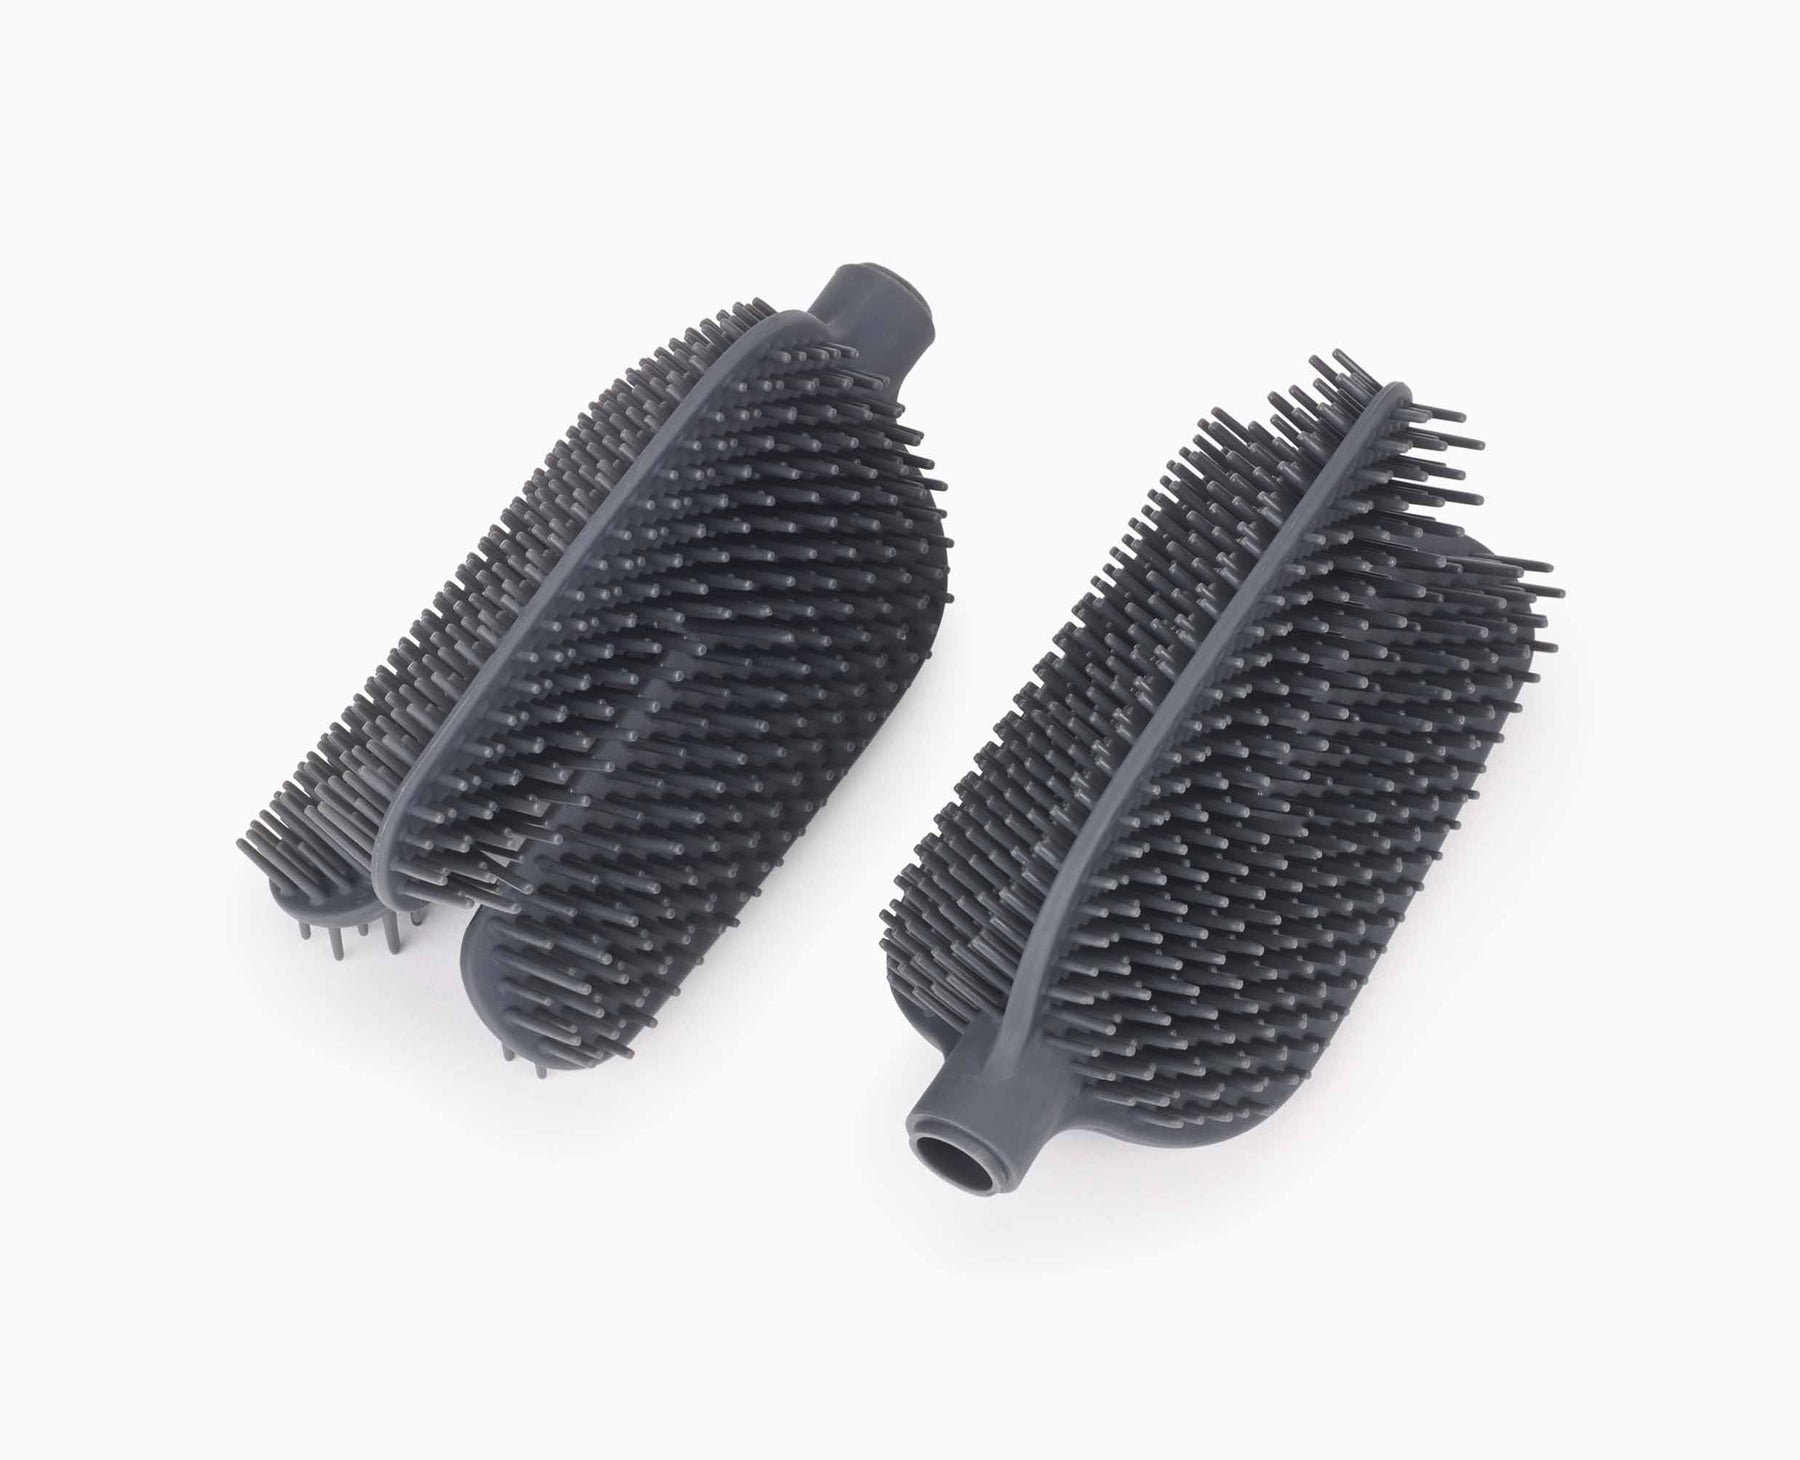 Flex™ 360 Replacement Toilet Brush Heads - 2 pack - 70584 - Image 2